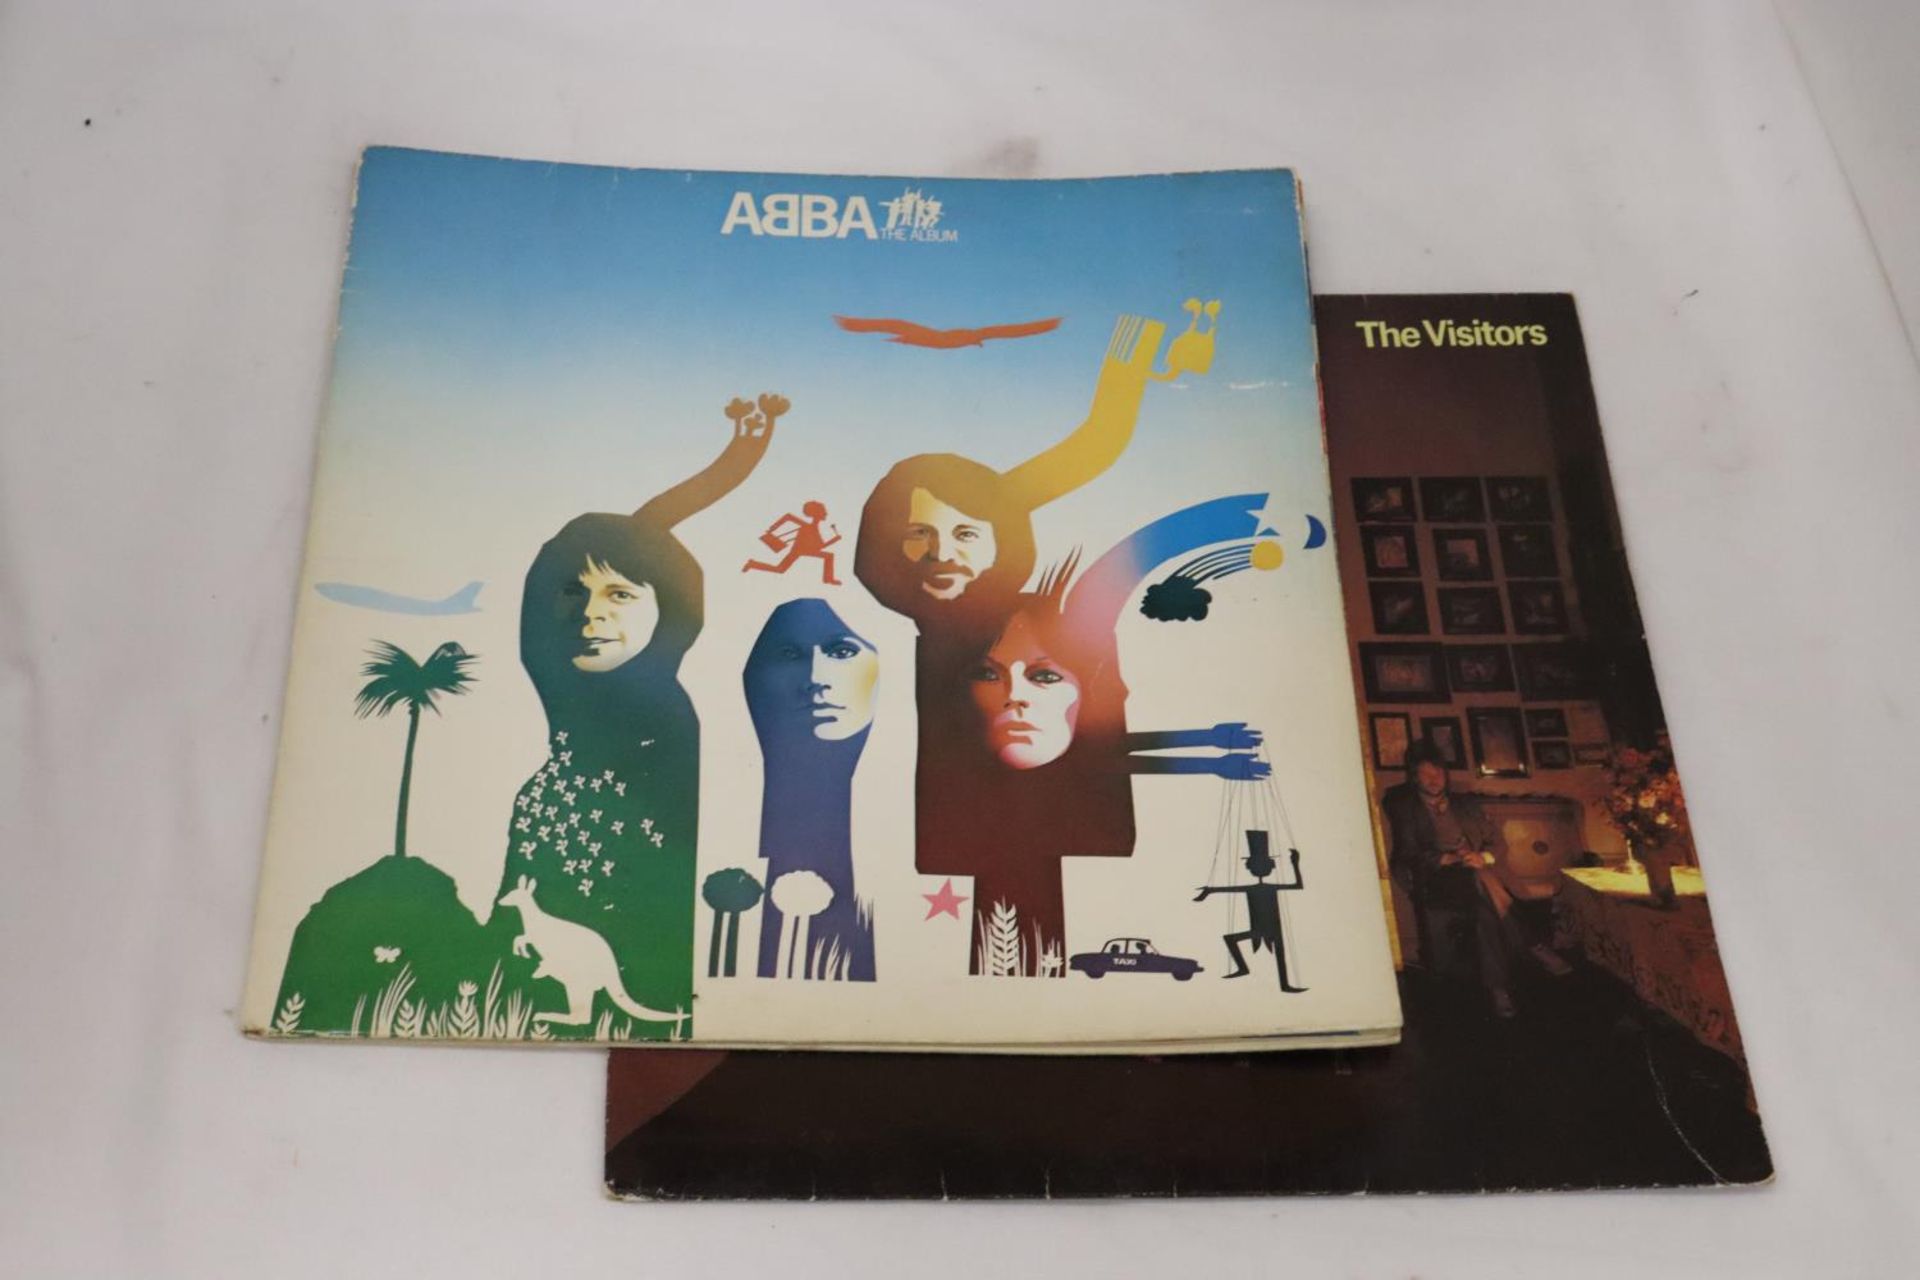 TWO ABBA ALBUMS - 1977 ABBA THE ALBUM AND 1981 THE VISITORS - Image 3 of 4